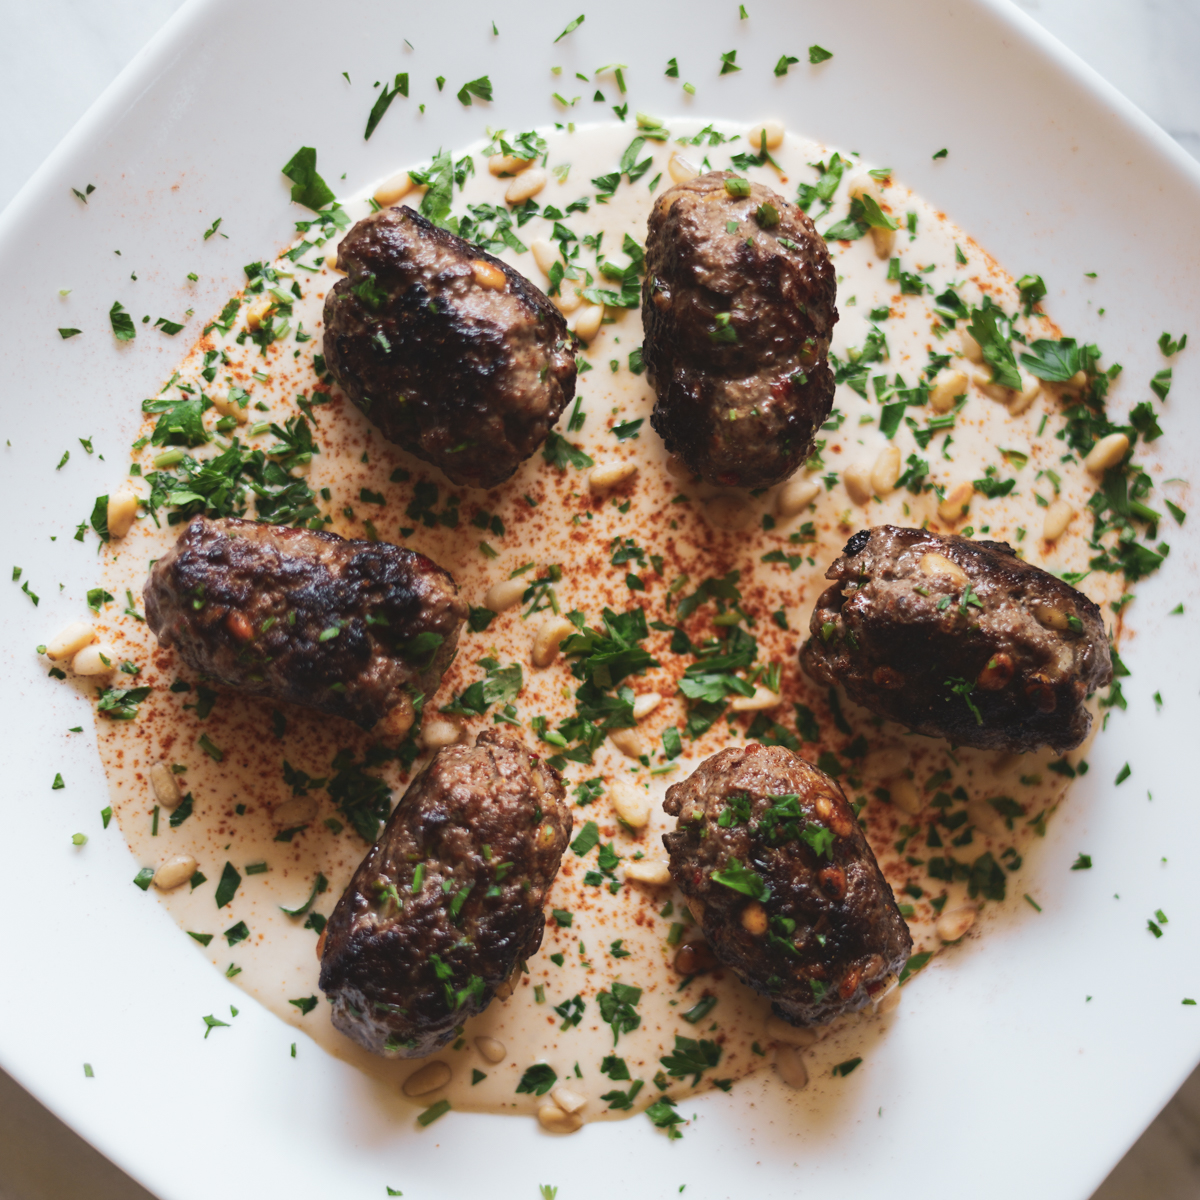 Kofta b'siniyah garnished with pine nuts and parsley on a white plate with a tahini sauce. Th